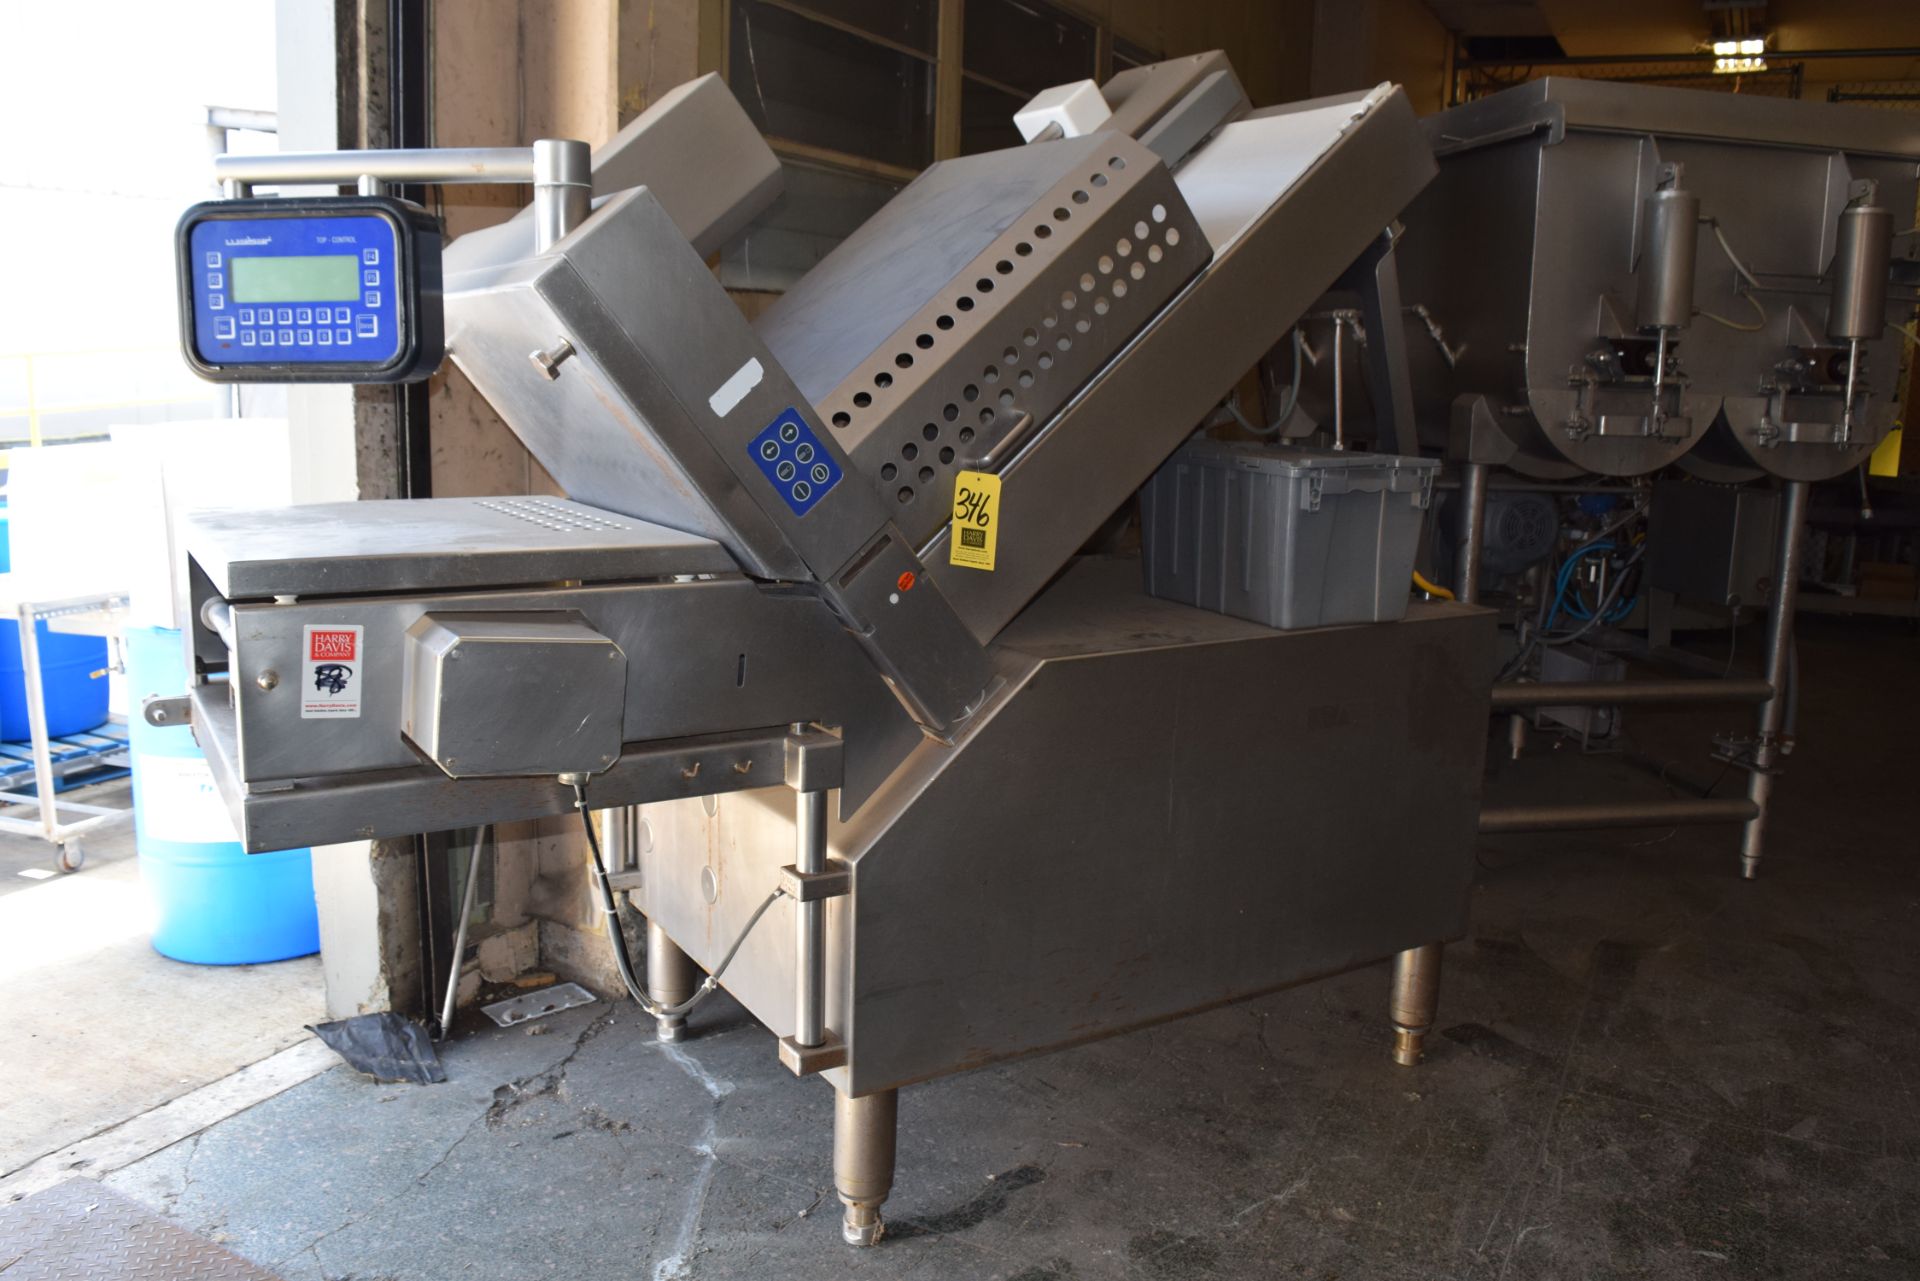 Weber Slicer, Type CCS600B, S/N 165 with Programmable Controls